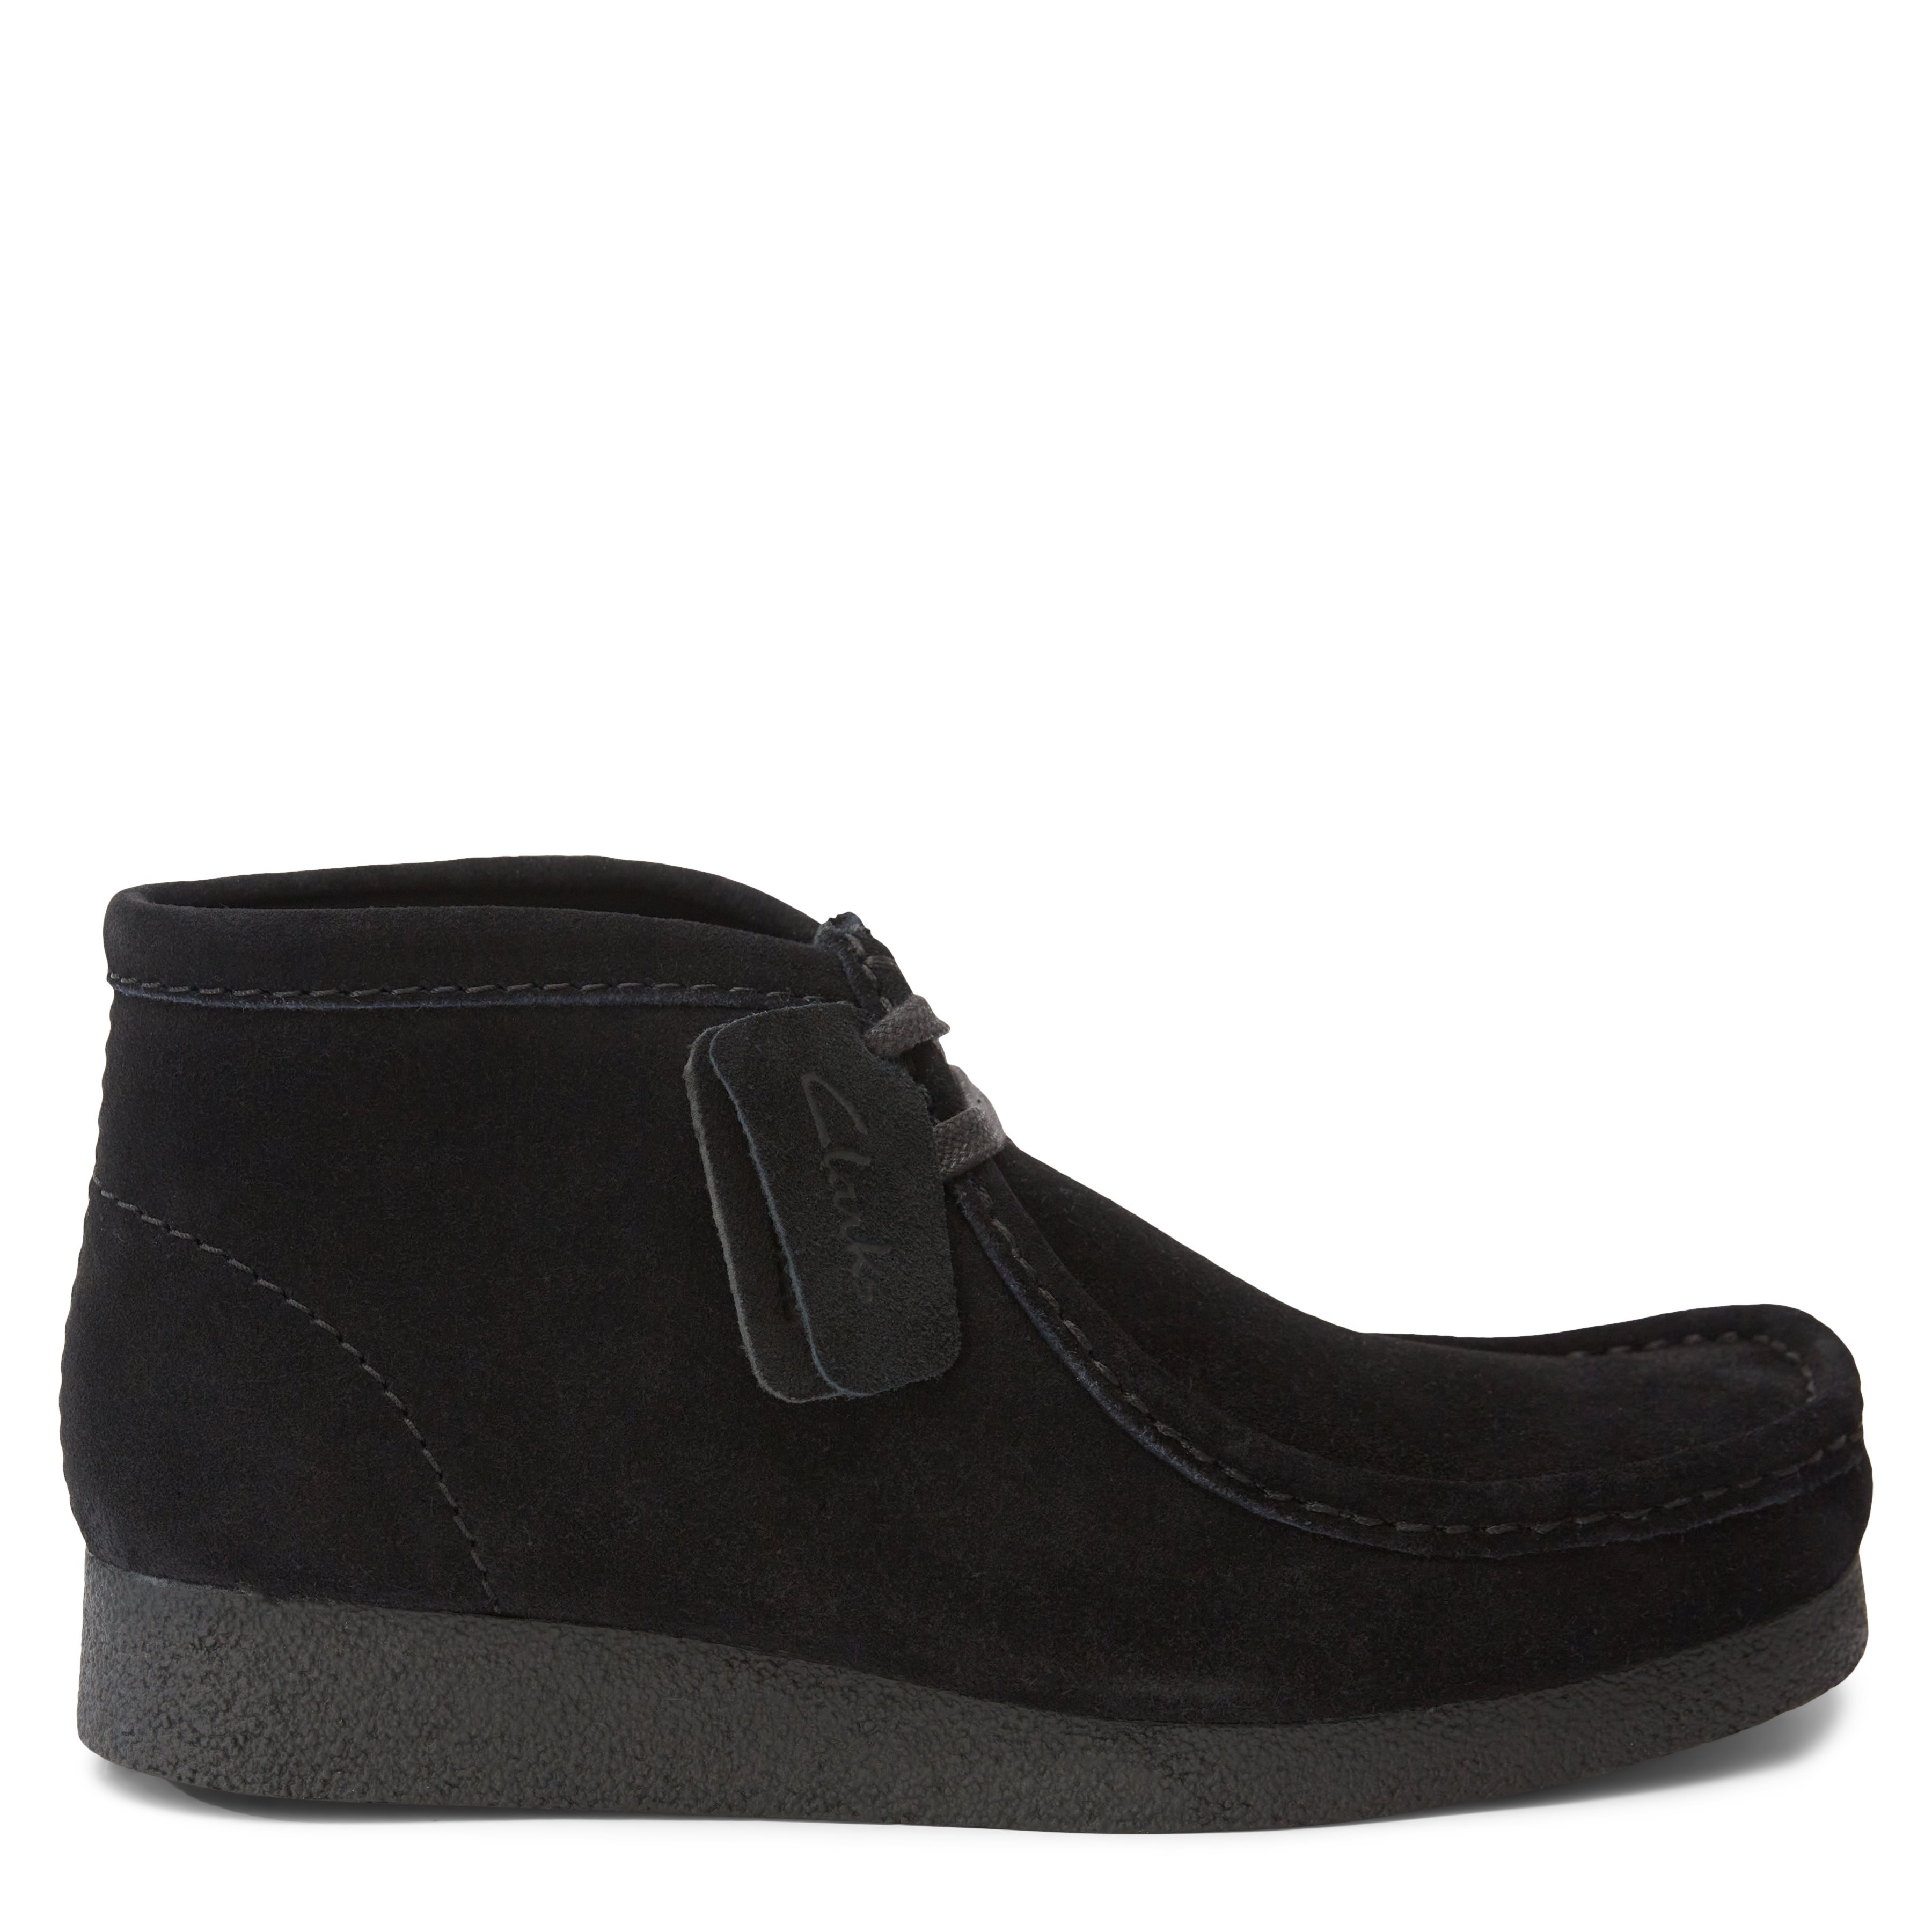 Clarks Shoes WALLABEE BOOT Black